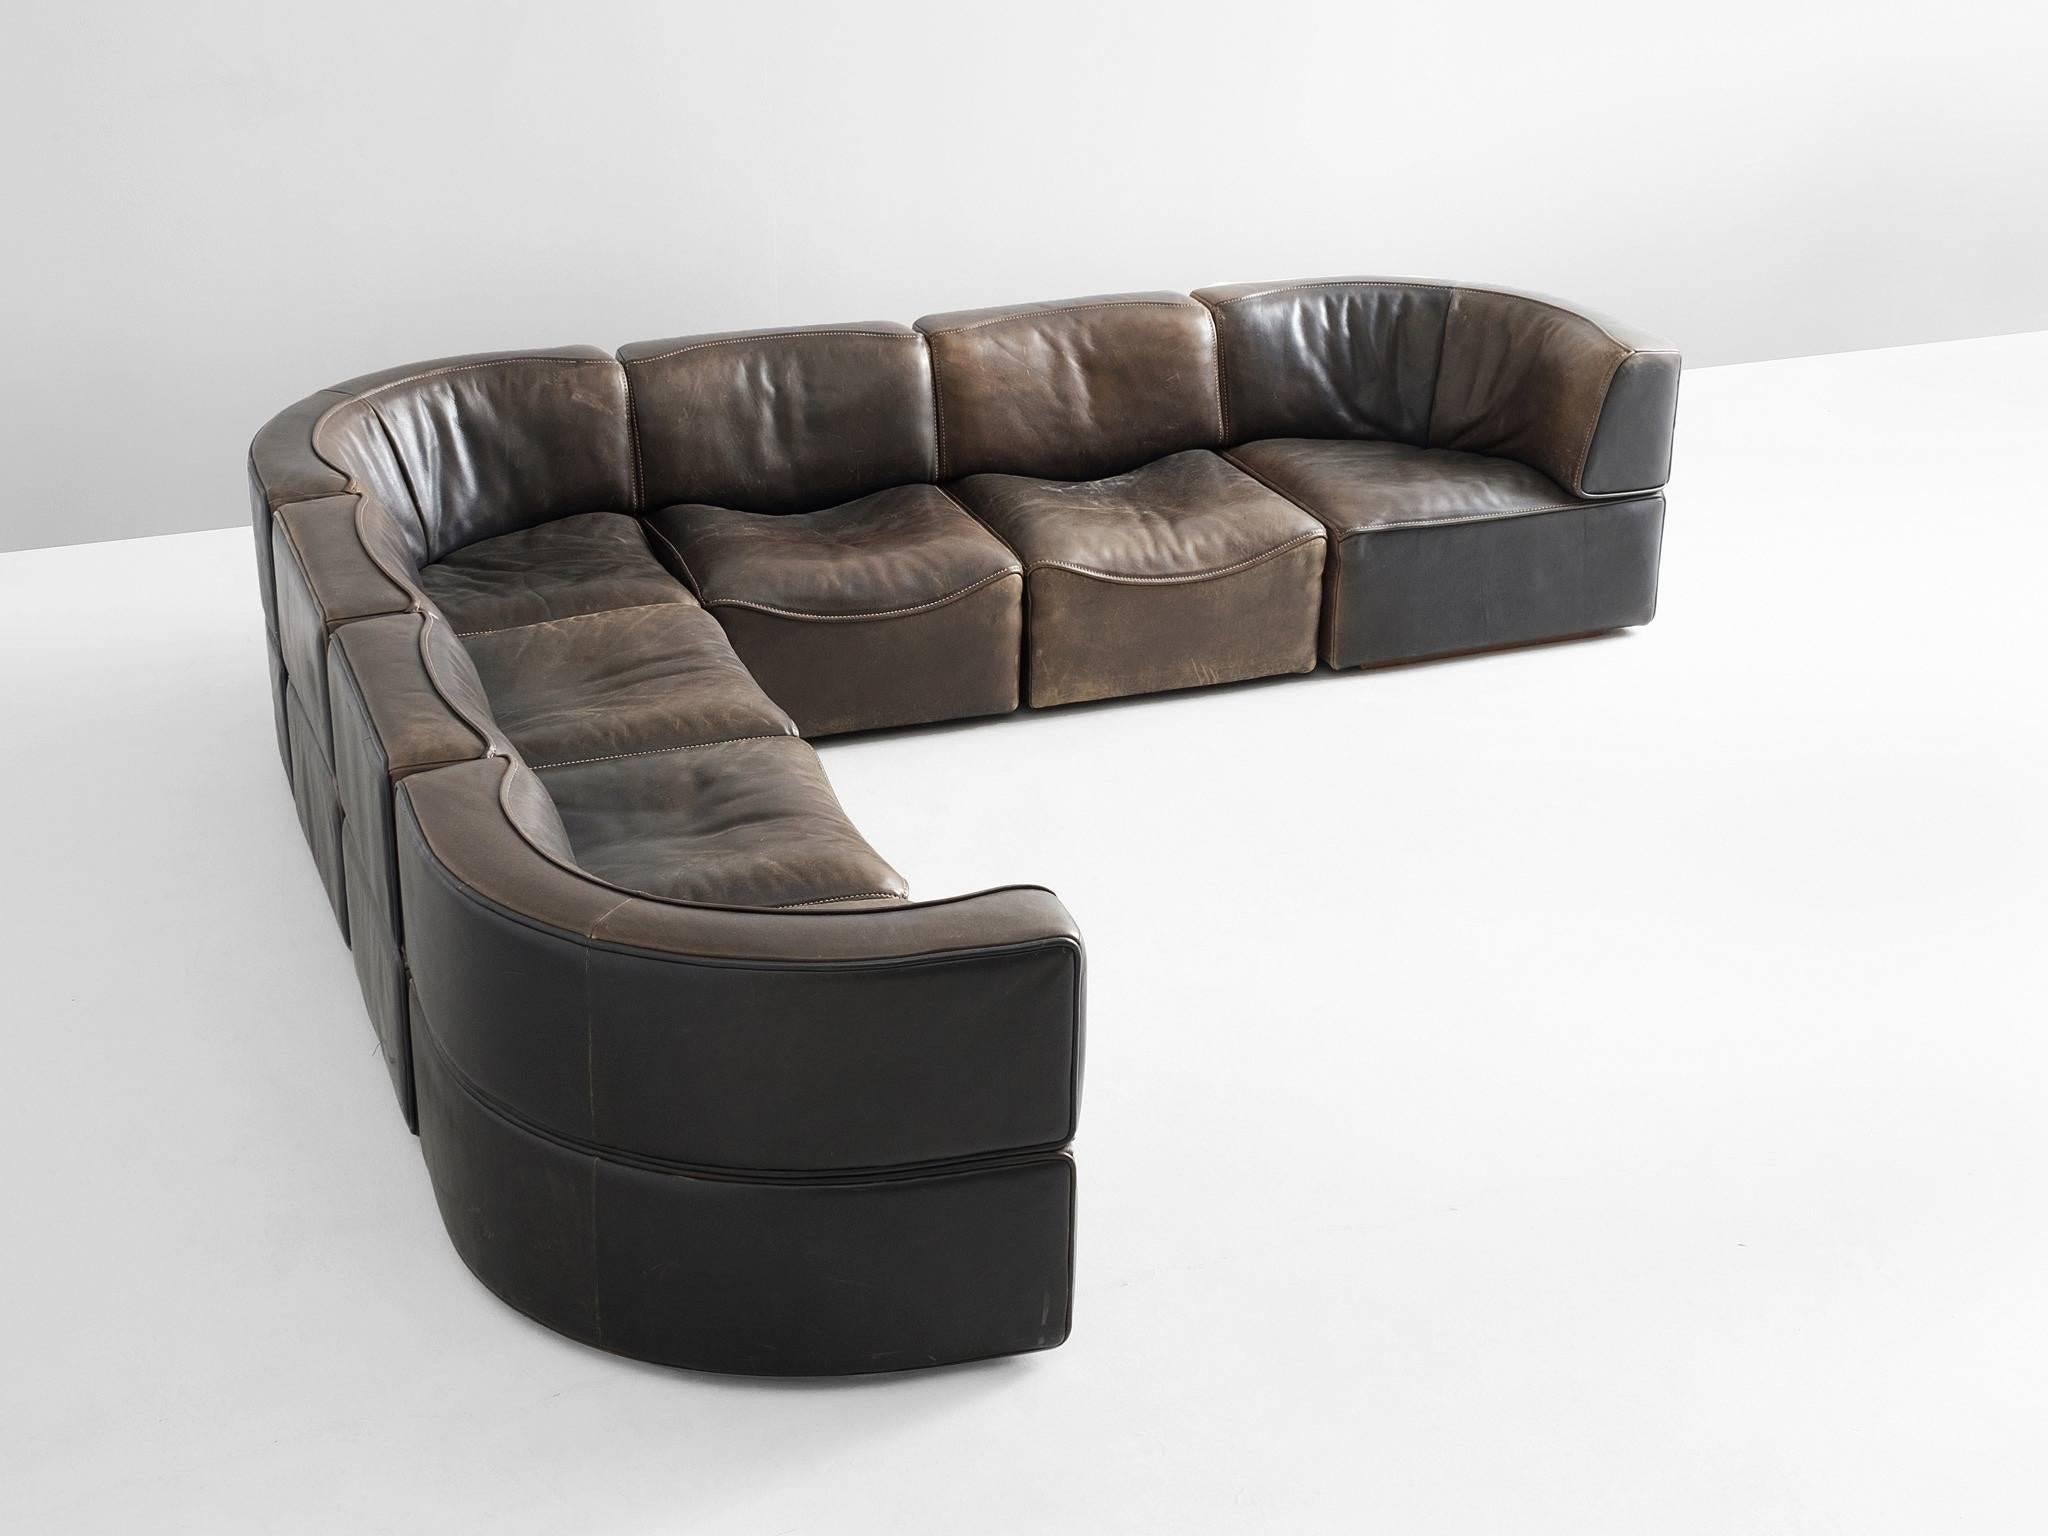 Sectional sofa model DS-15, in leather, by De Sede, Switzerland 1970s.

This high-quality sectional sofa contains three corner elements and four normal elements, which makes it possible to arrange this sofa to your own wishes. The design is